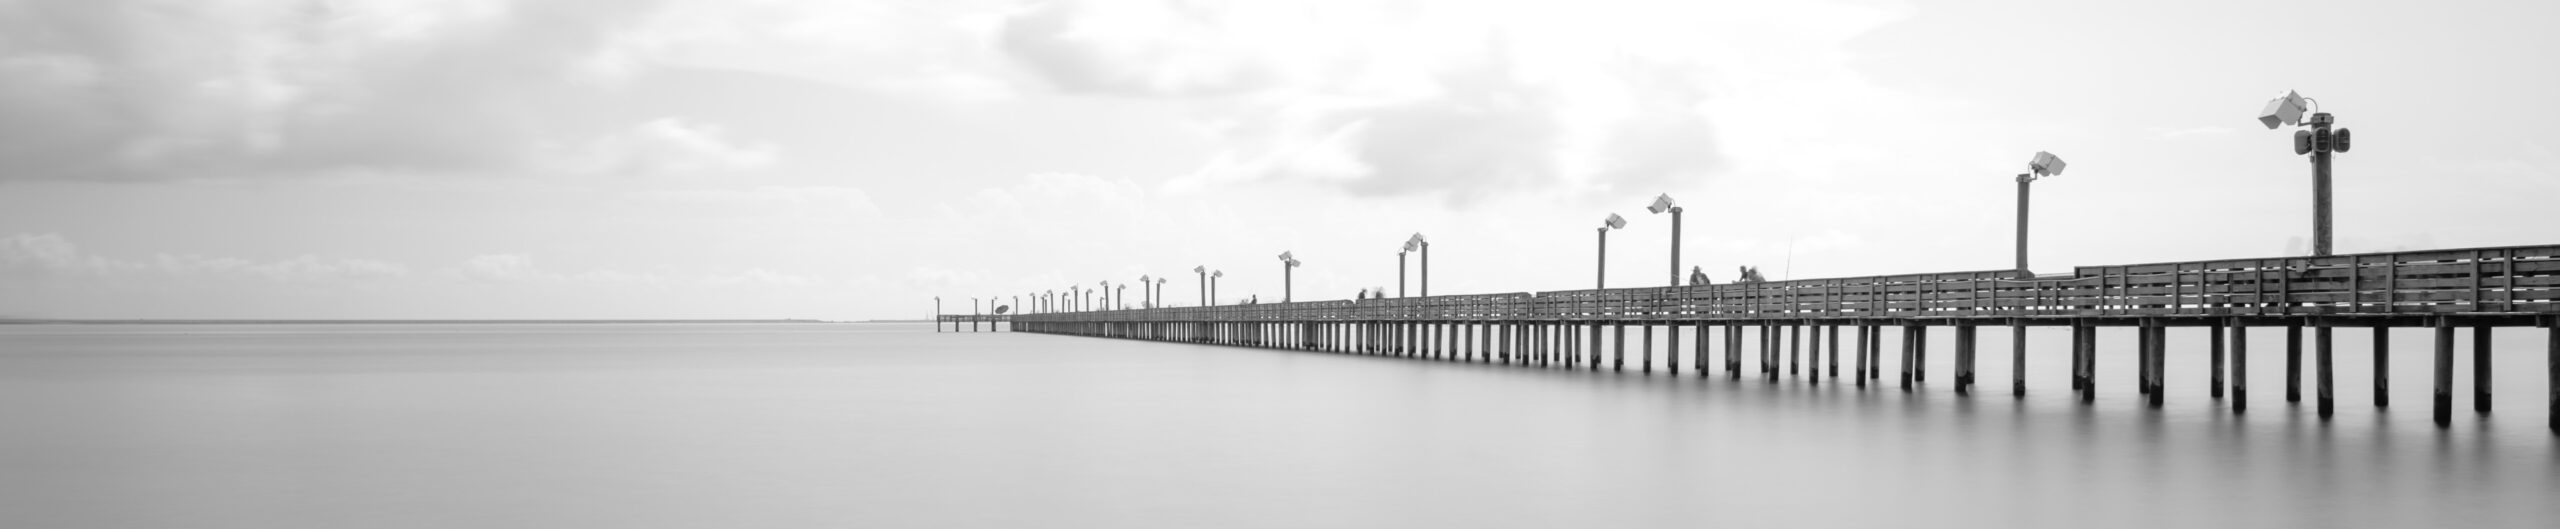 Long exposure wooden fishing pier stretching out over Galveston Bay in La Porte, Texas, USA. Foot pier for saltwater fishing with motion blurred people, recreation concept. Panorama nature seascape